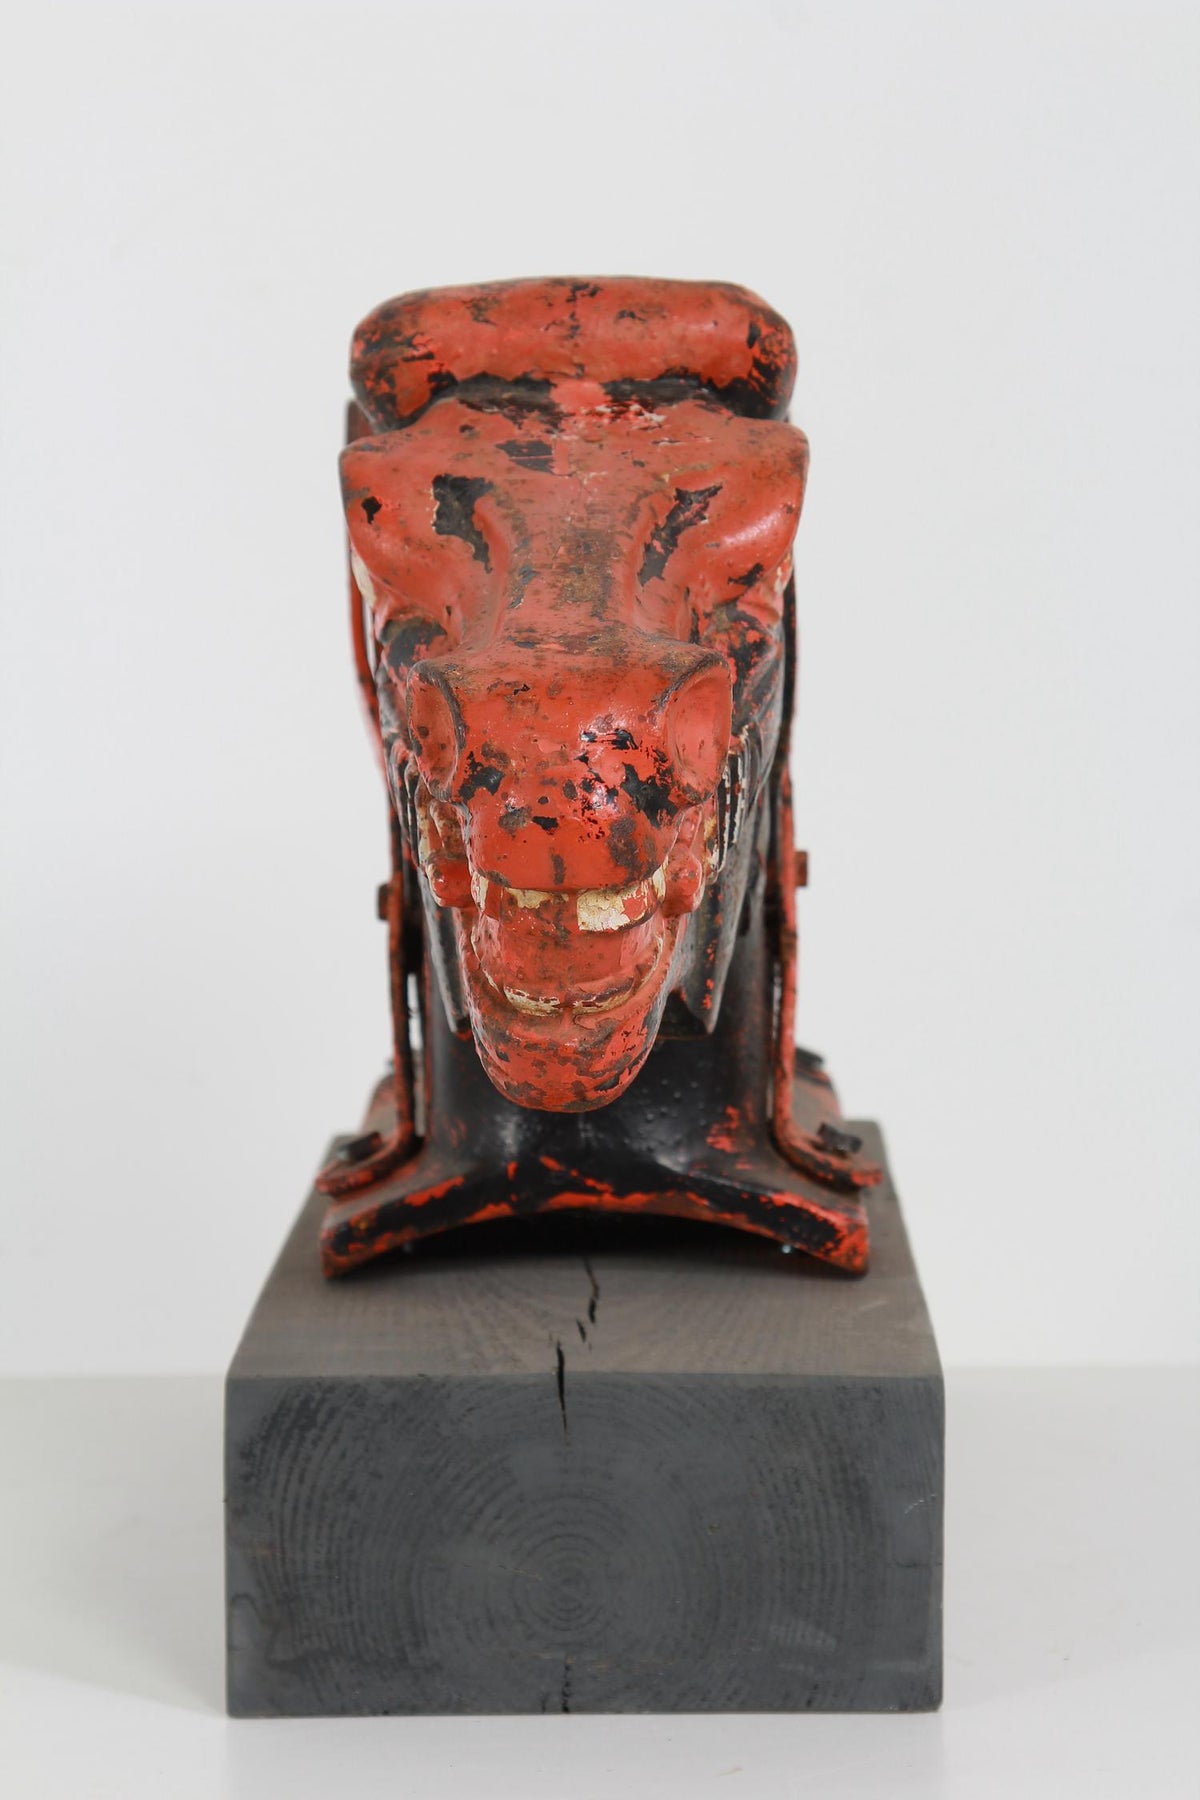 EXCEPTIONAL ARCHITECTURAL CAST IRON RED HORSES HEAD